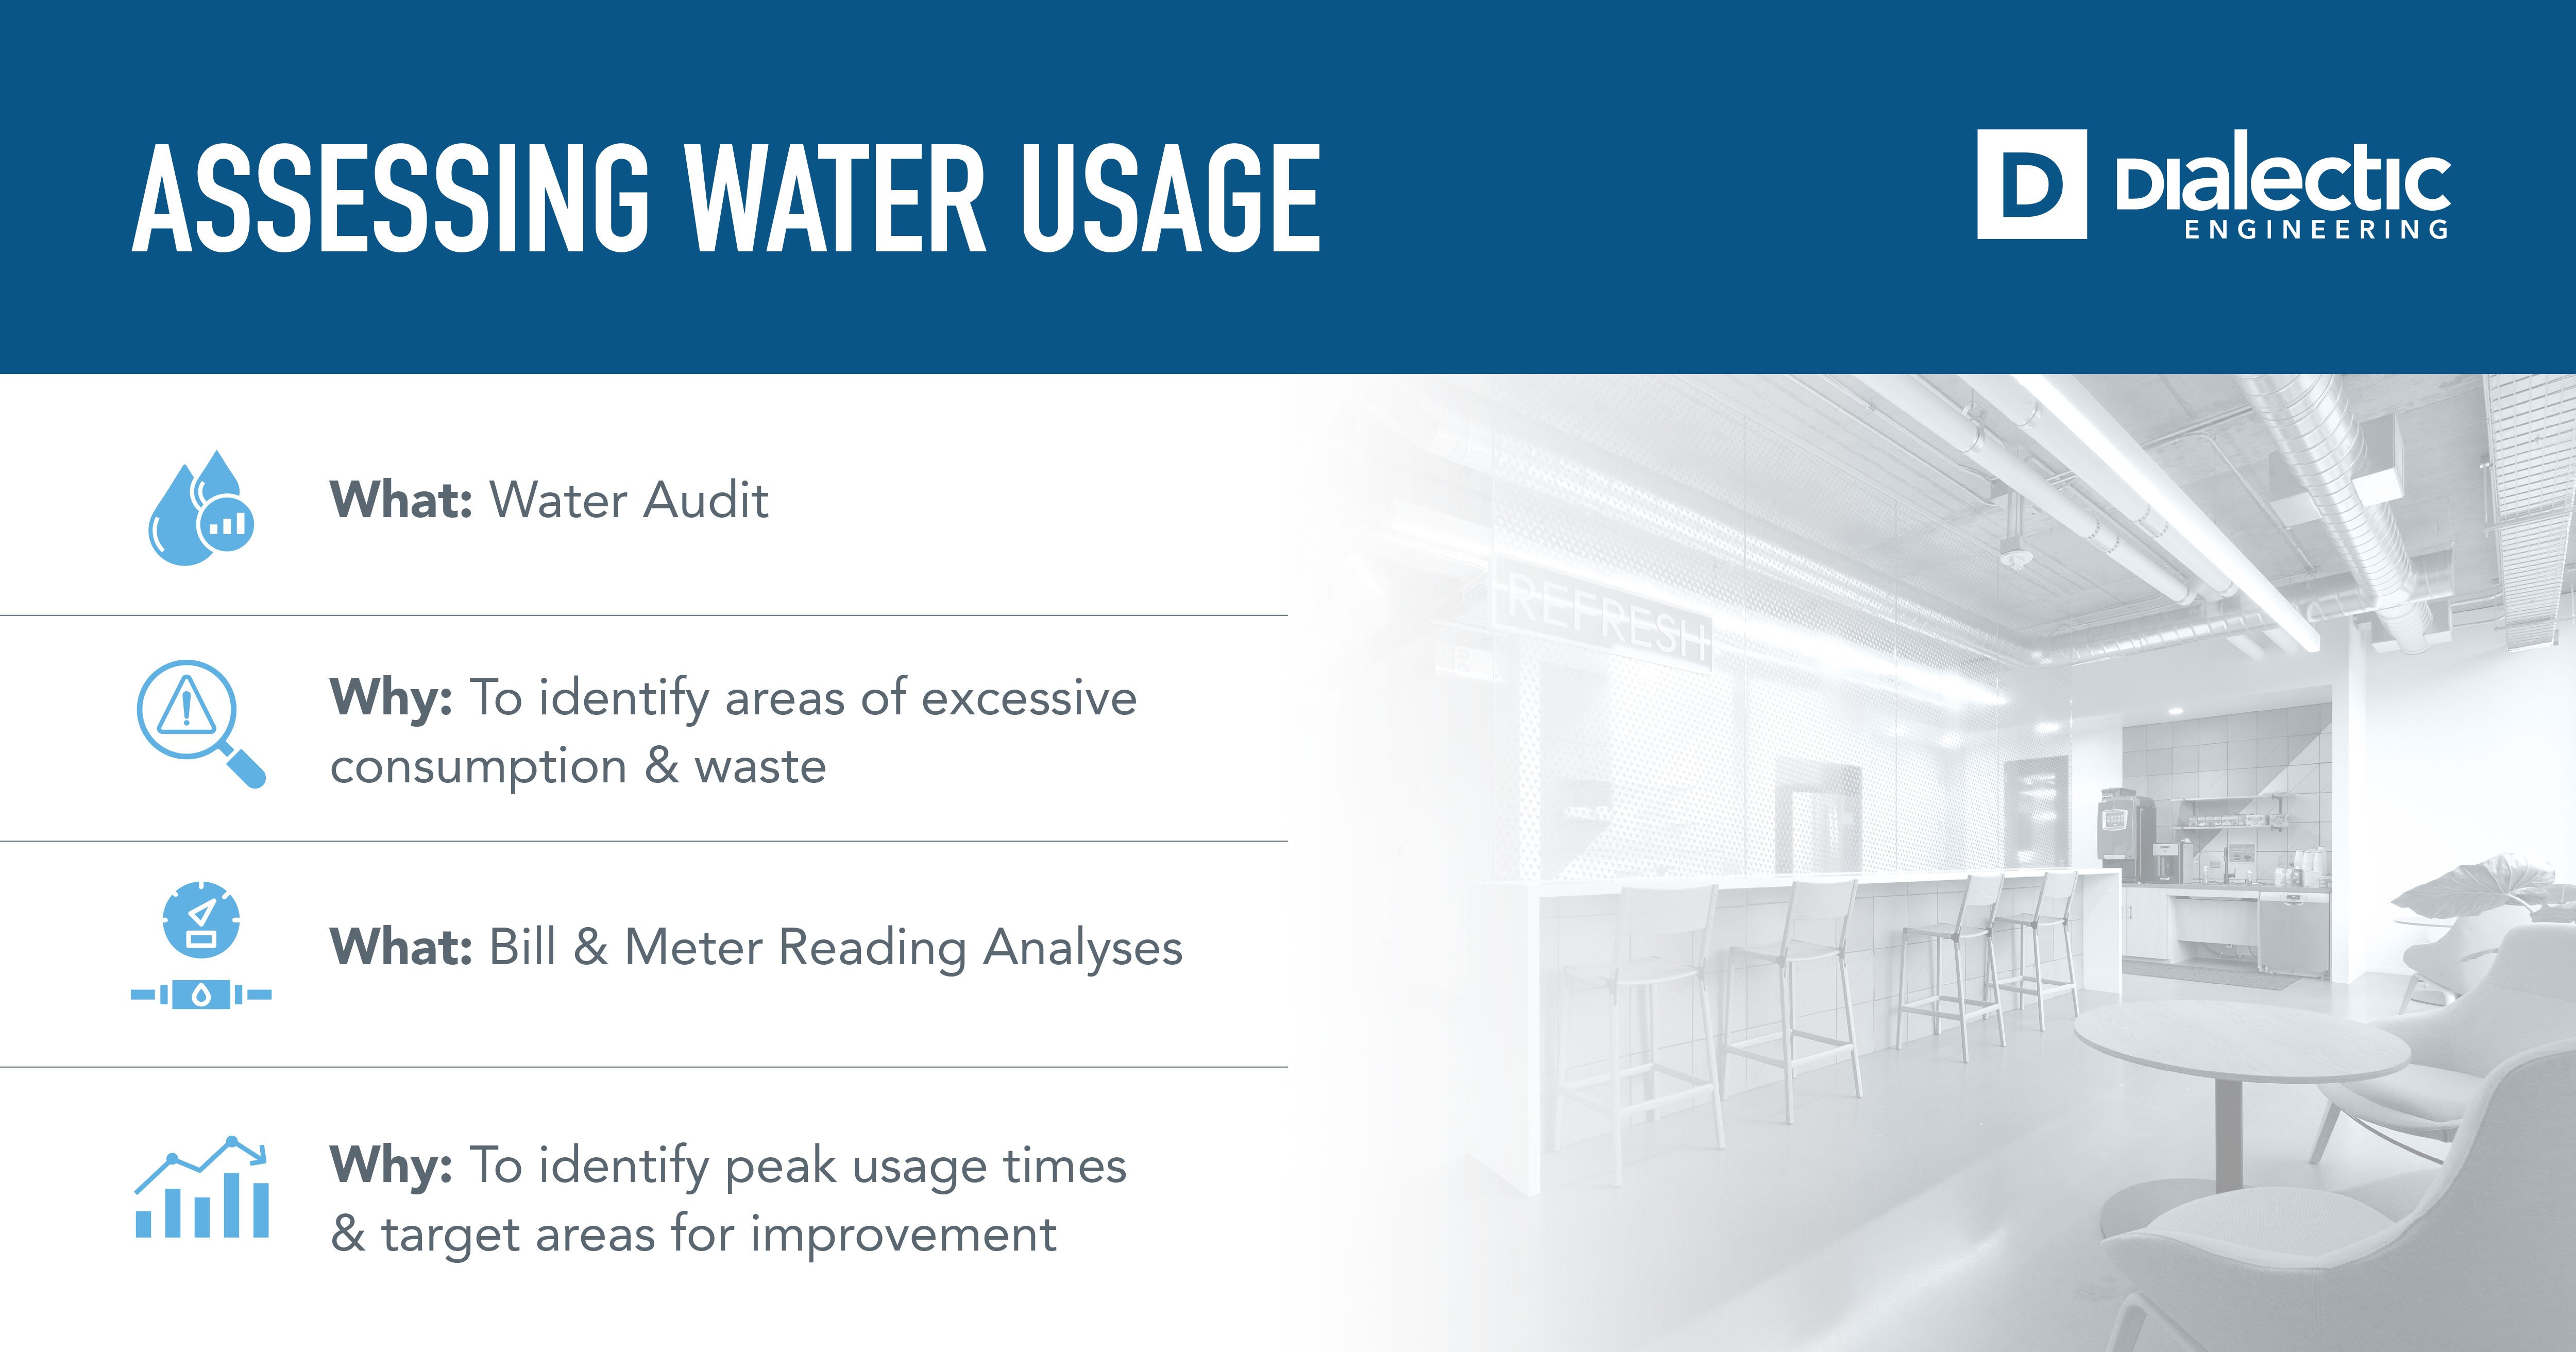 4443 - Q1 Blog Graphics_Assessing Water Use